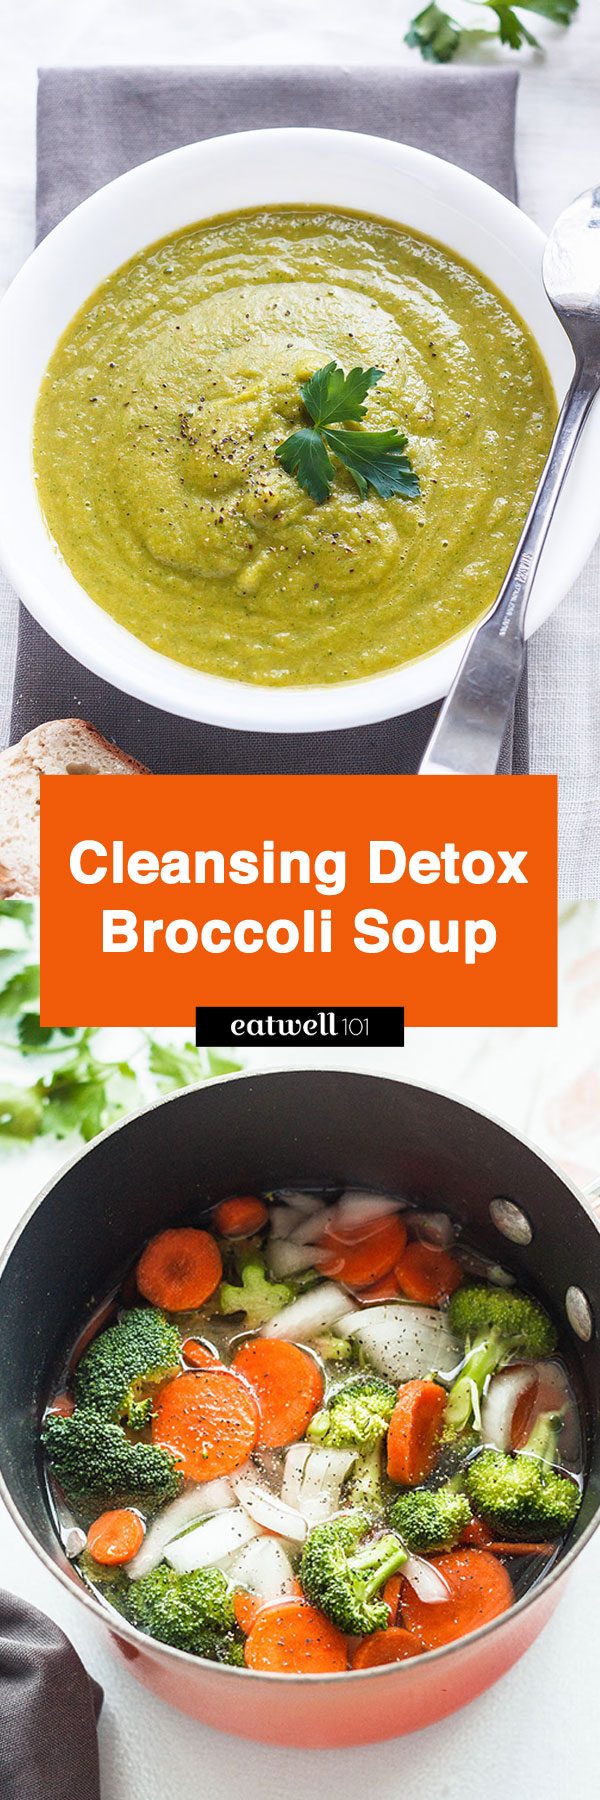 Cleansing Detox Soup - Packed with all the good stuff, this cleansing detox soup  is the perfect way to kick start a detox diet after the holidays splurge!